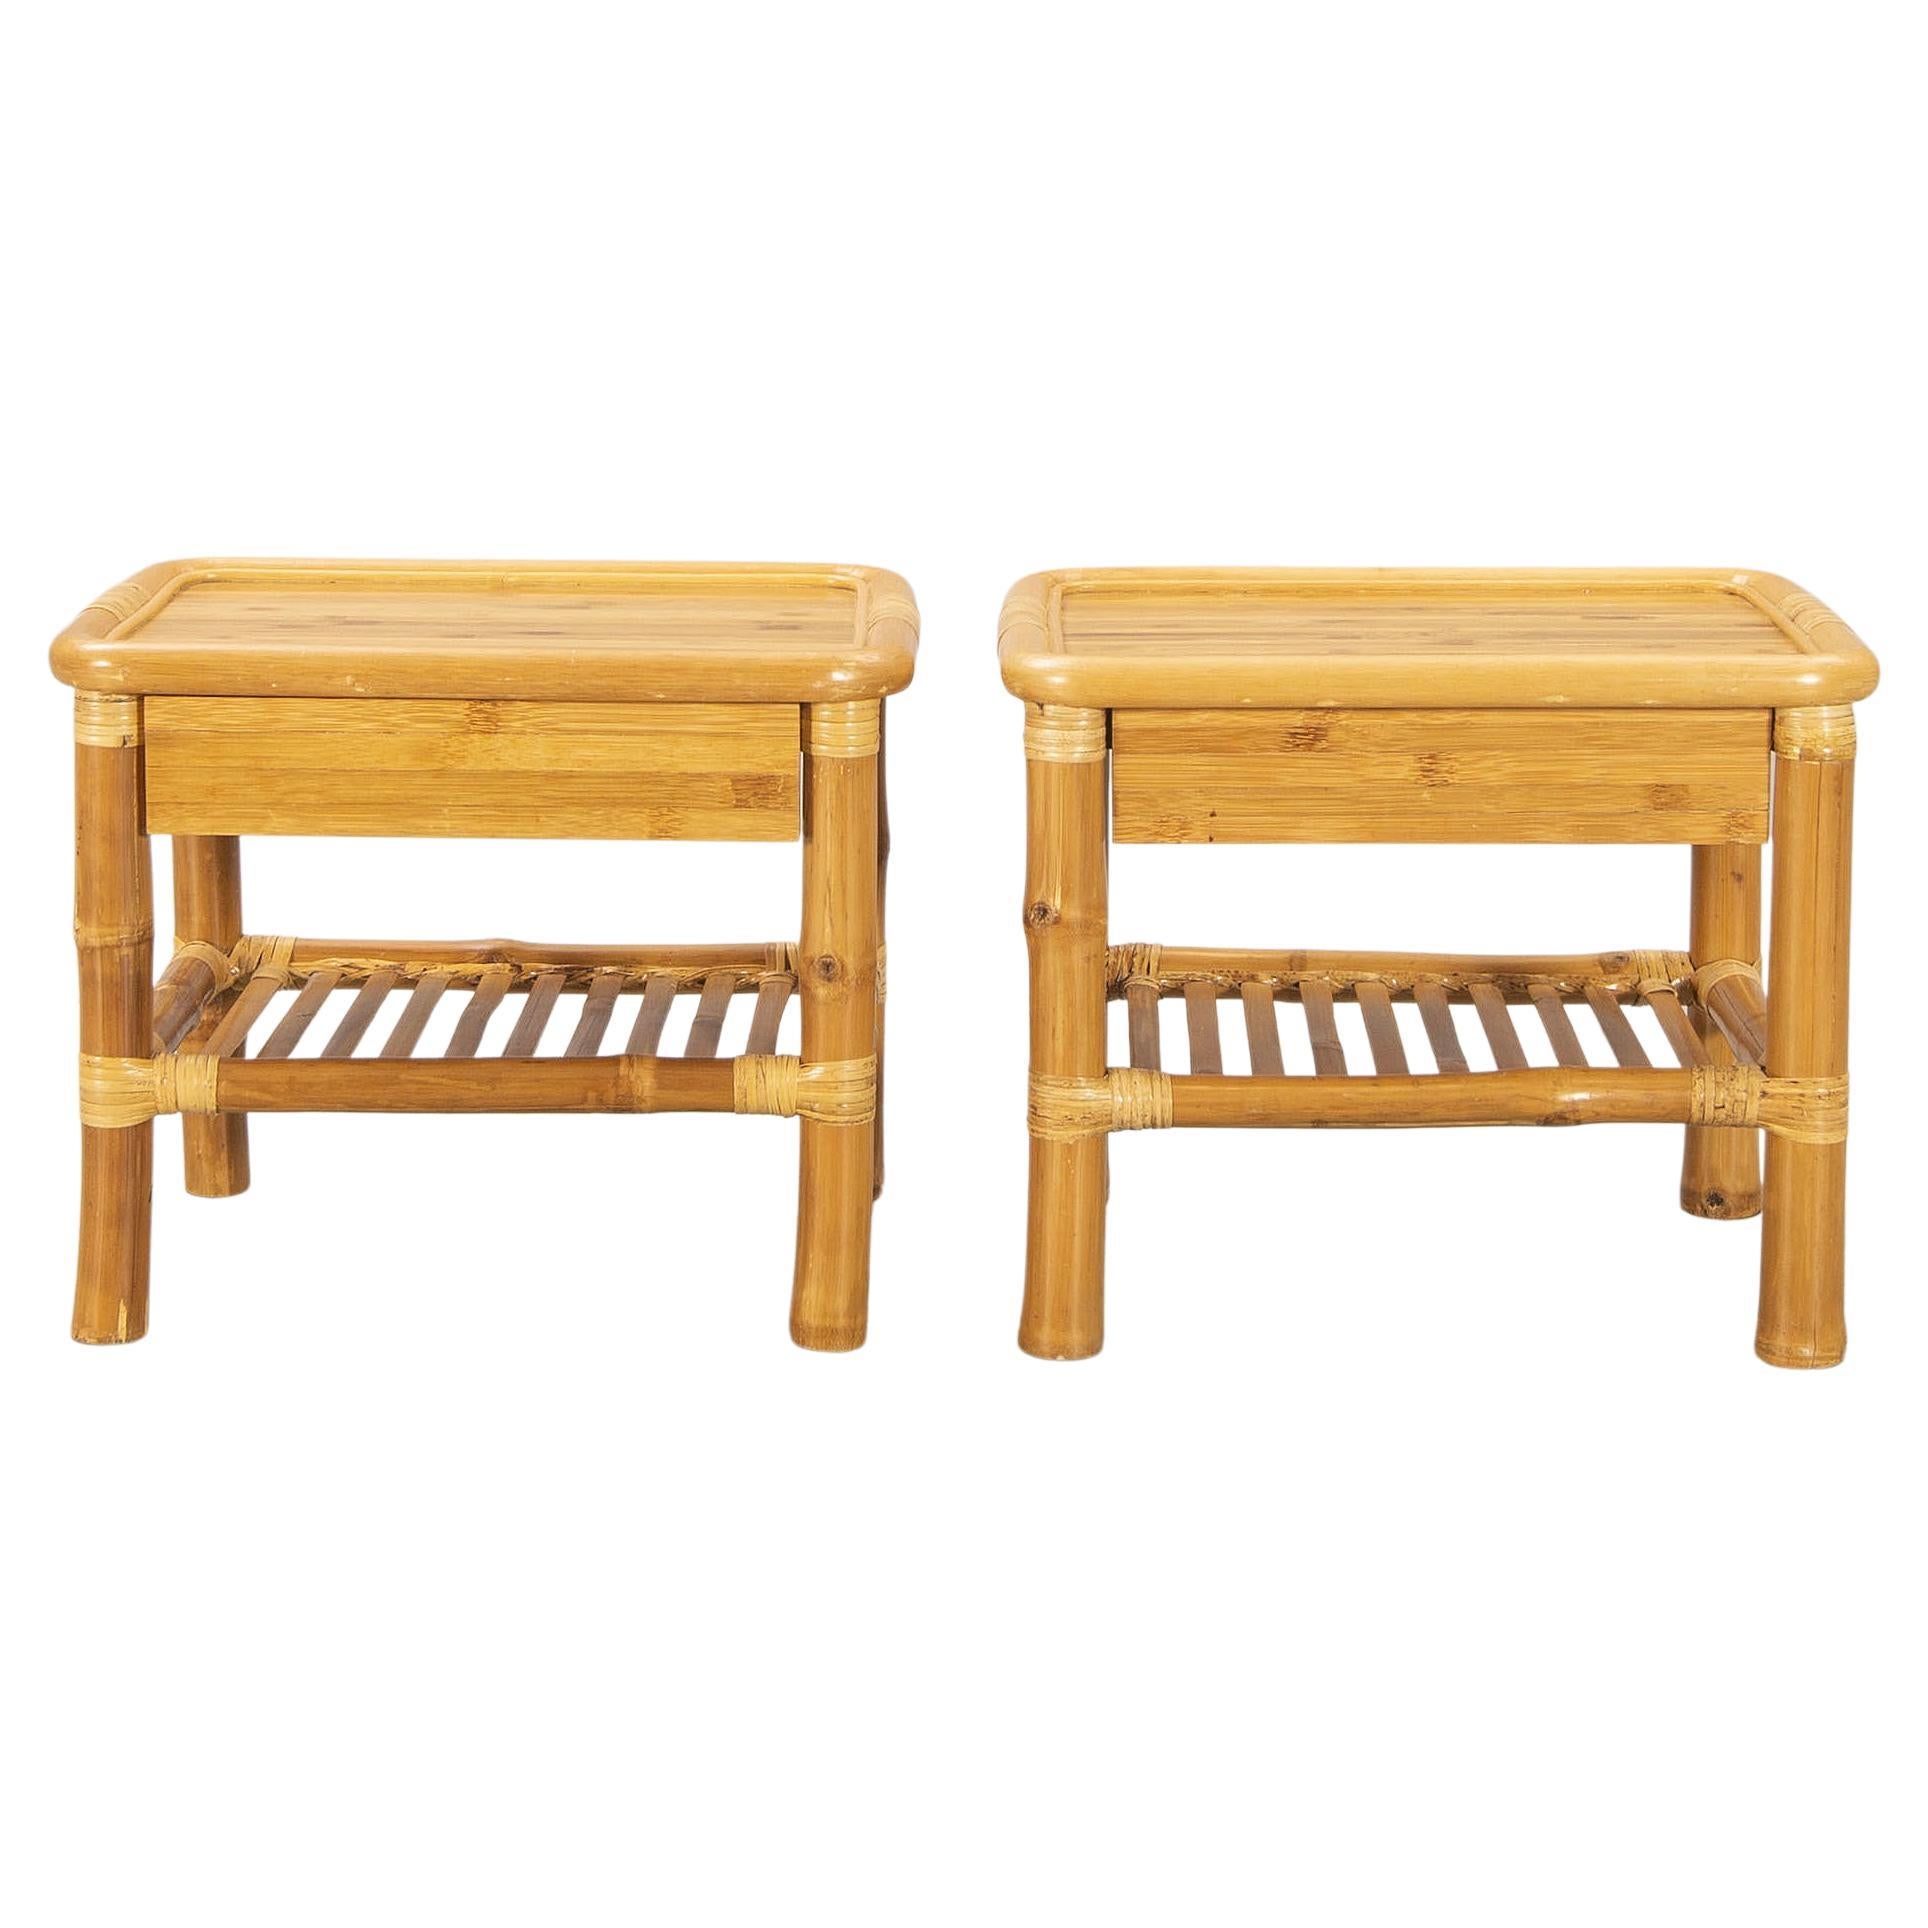 Bamboo and Wood Tables a Pair Probably by DUX, Sweden, 1960